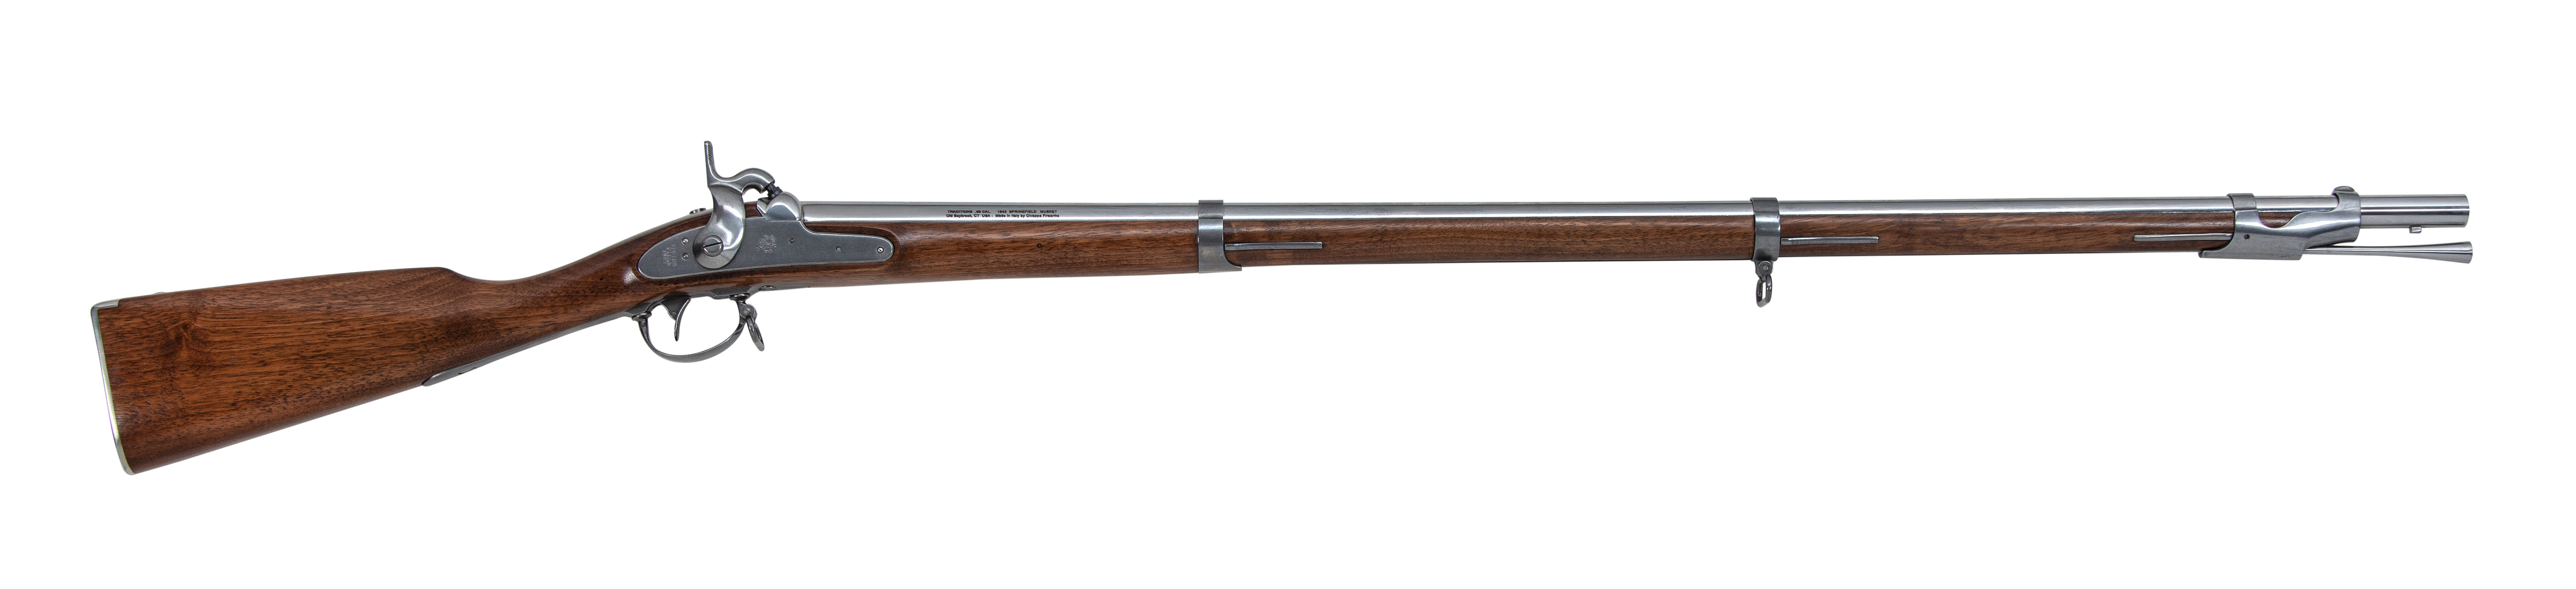 1842 Springfield Musket - .69 Cal Smoothbore R184200